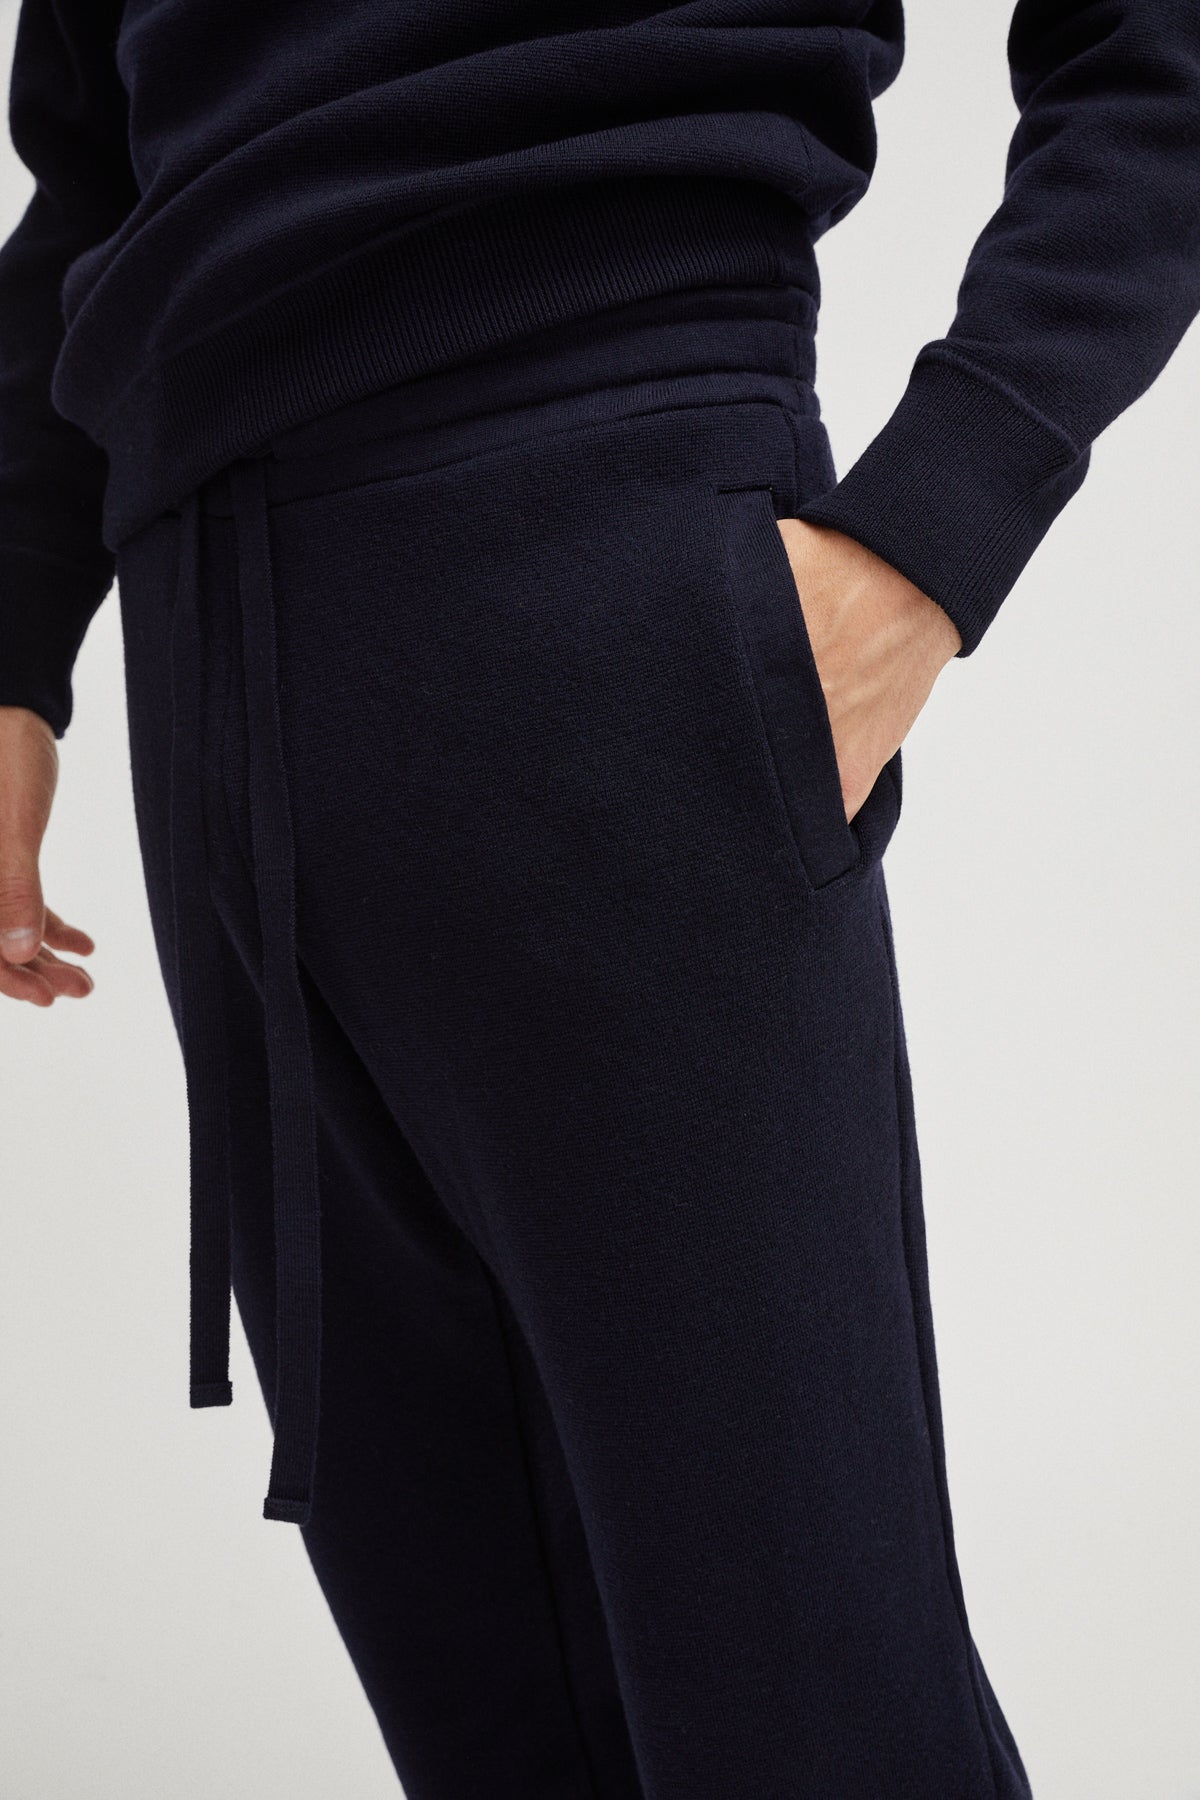 Blue Navy | The Merino Wool Jogger – Imperfect Version